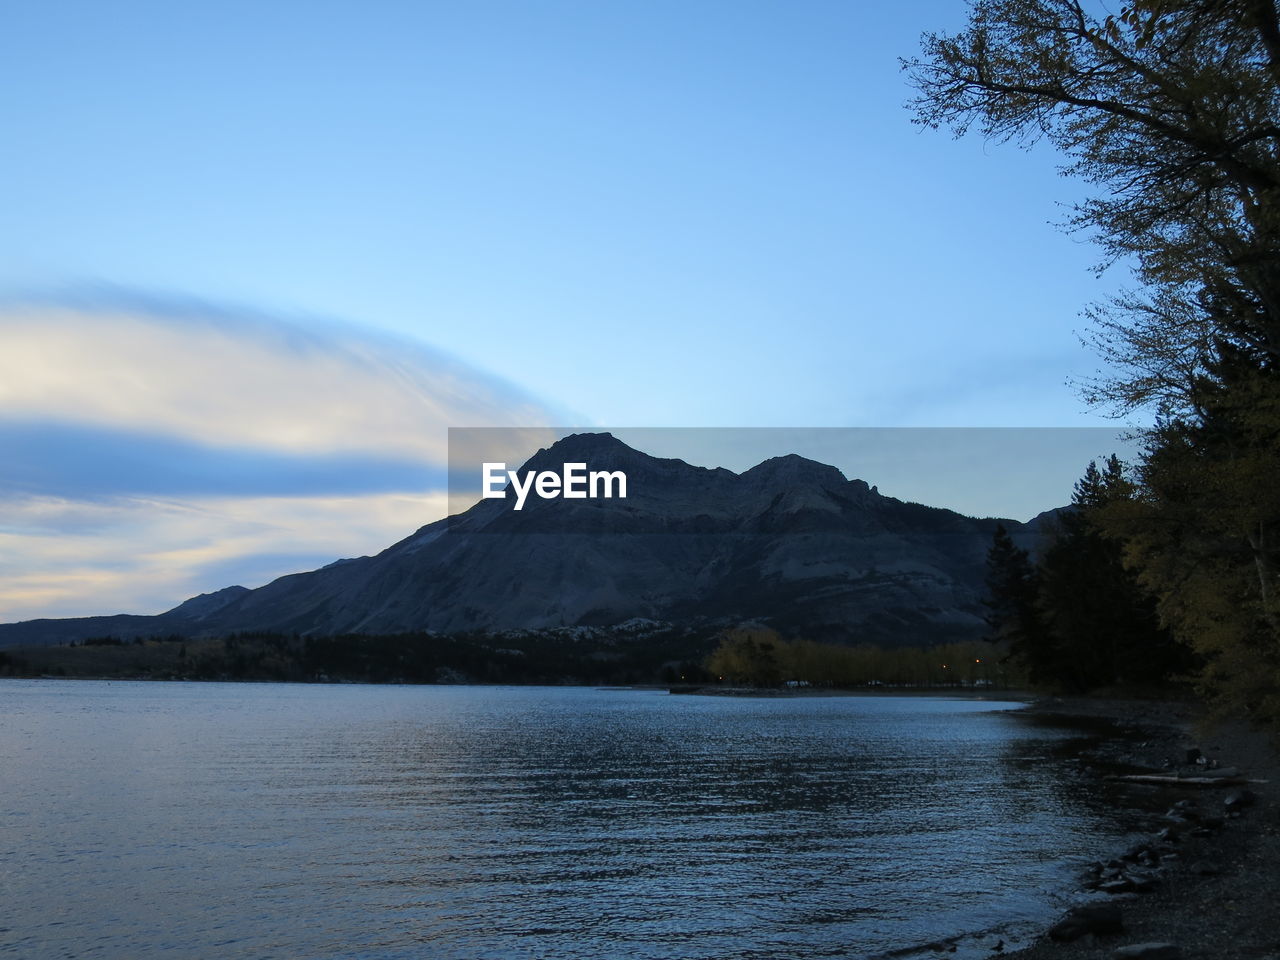 LAKE BY MOUNTAINS AGAINST SKY